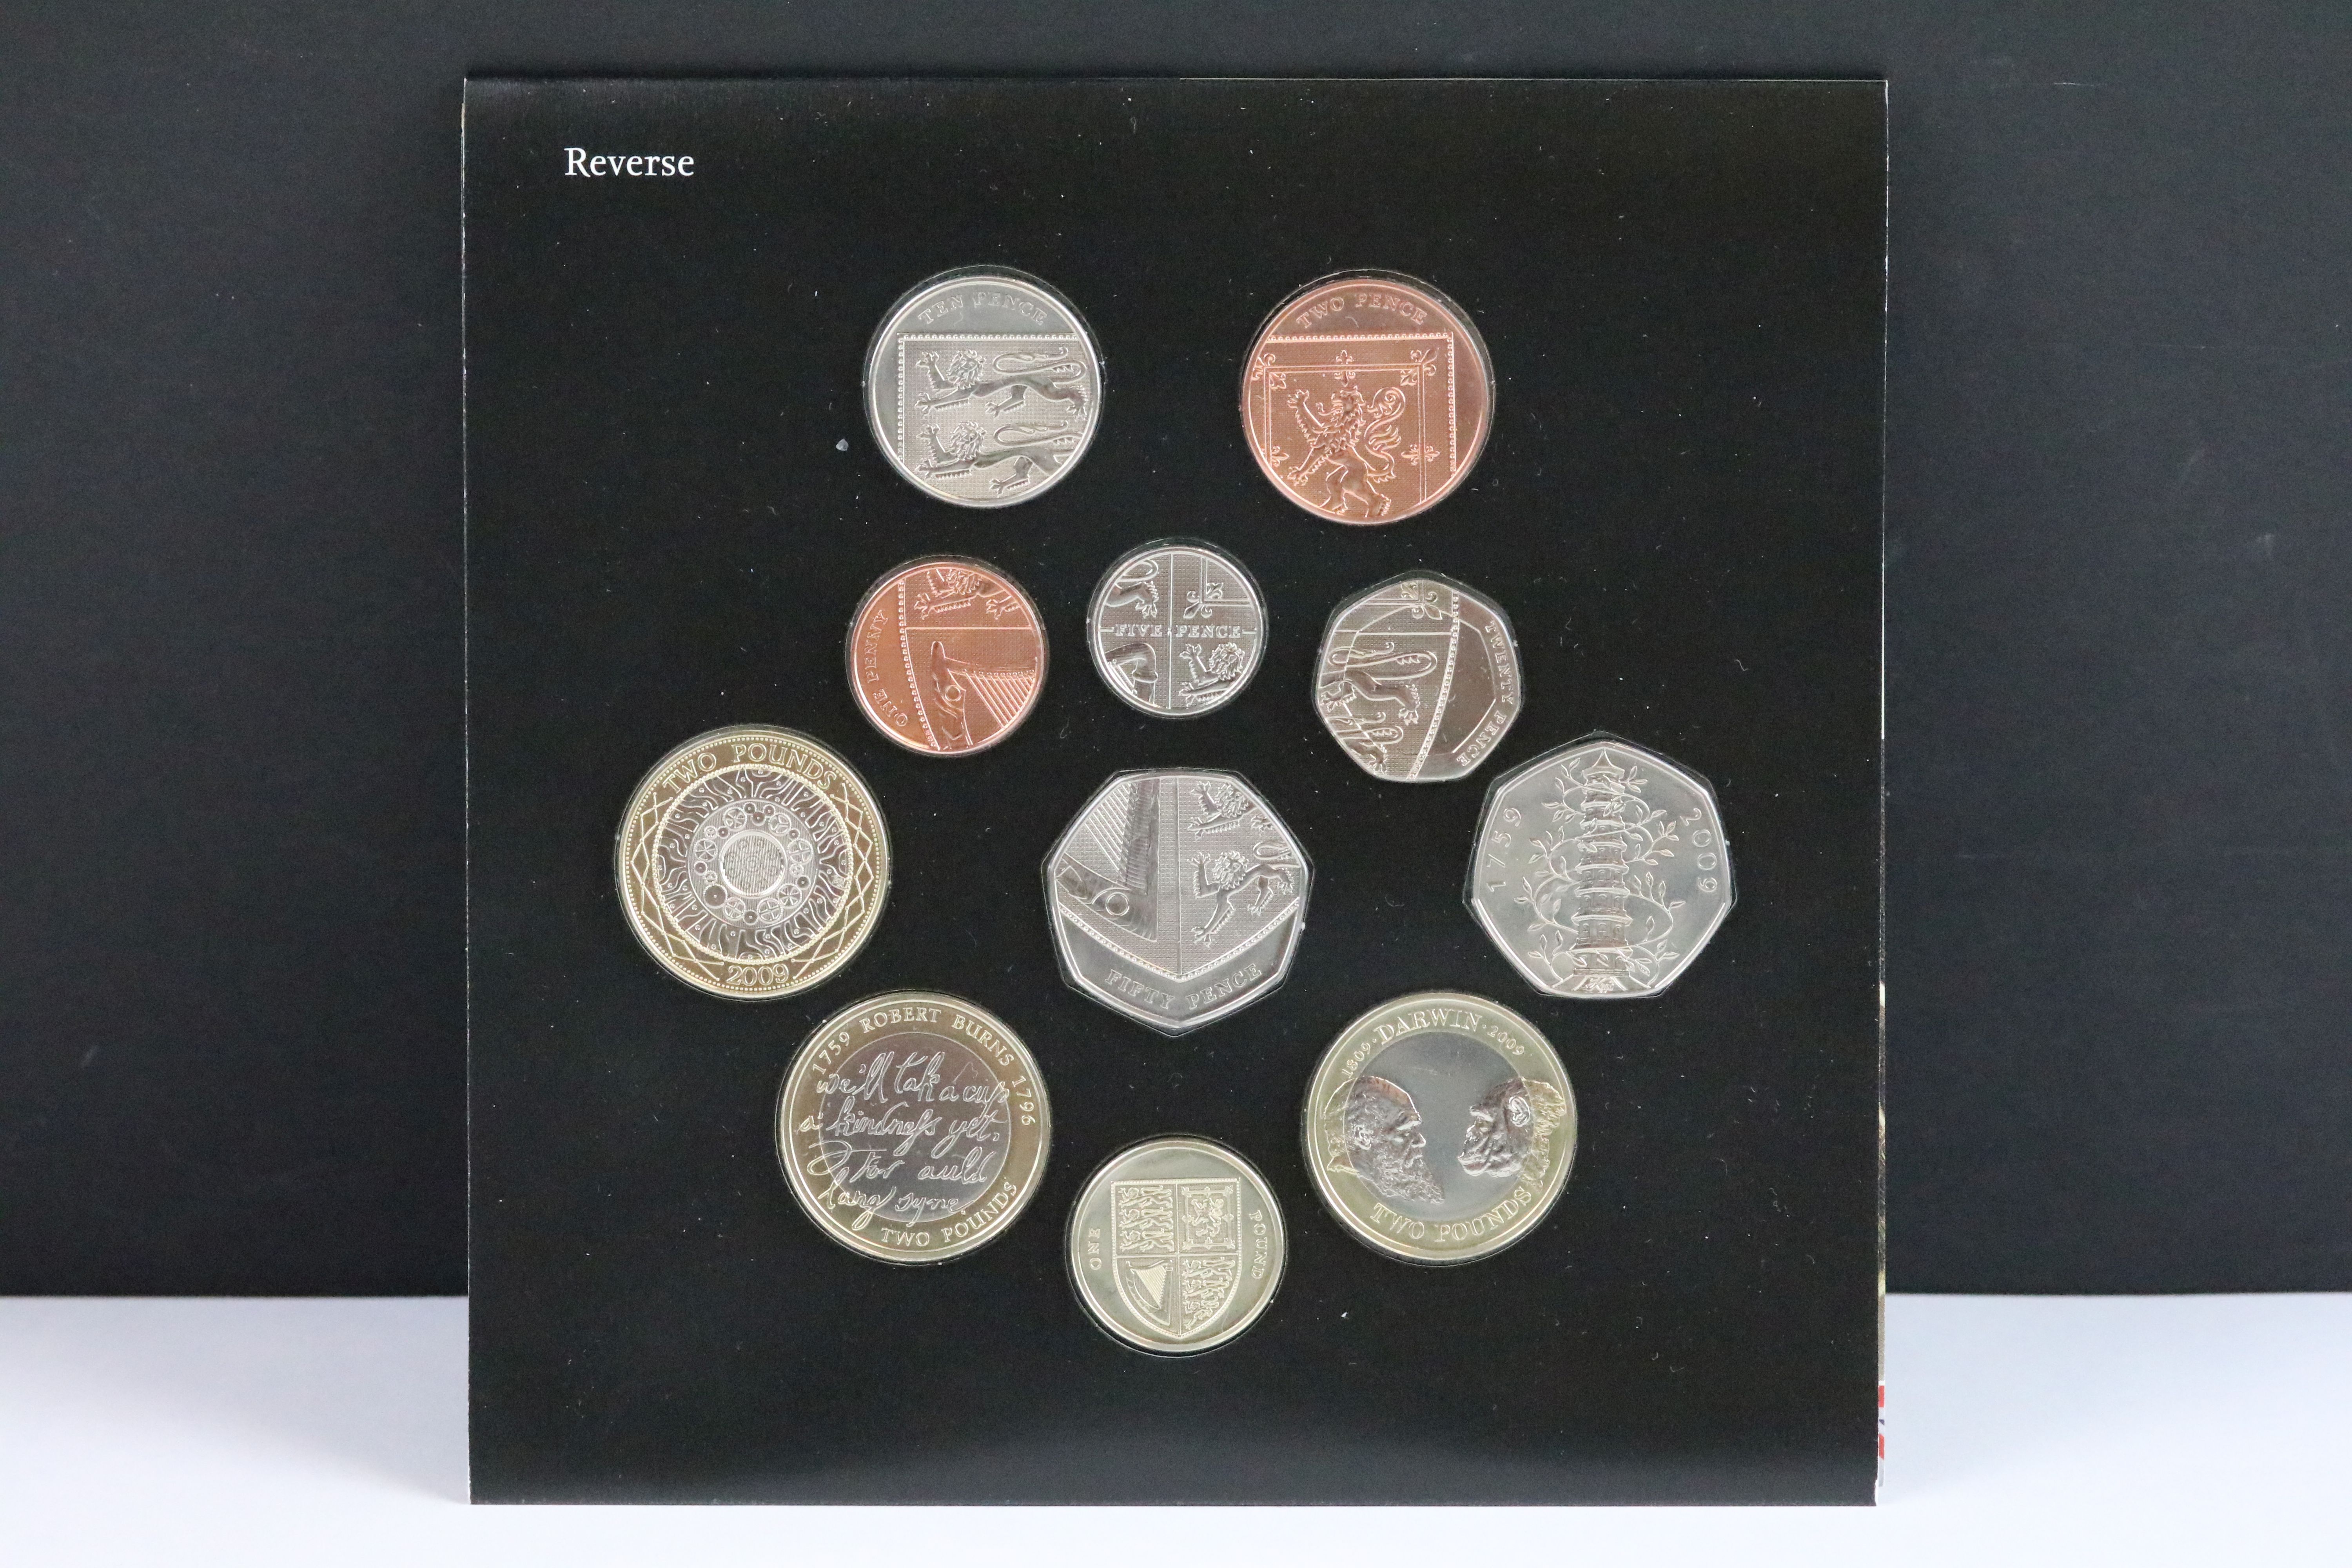 A British Royal Mint brilliant uncirculated 2009 coin set to include the Kew Gardens 50p coin. - Bild 2 aus 5